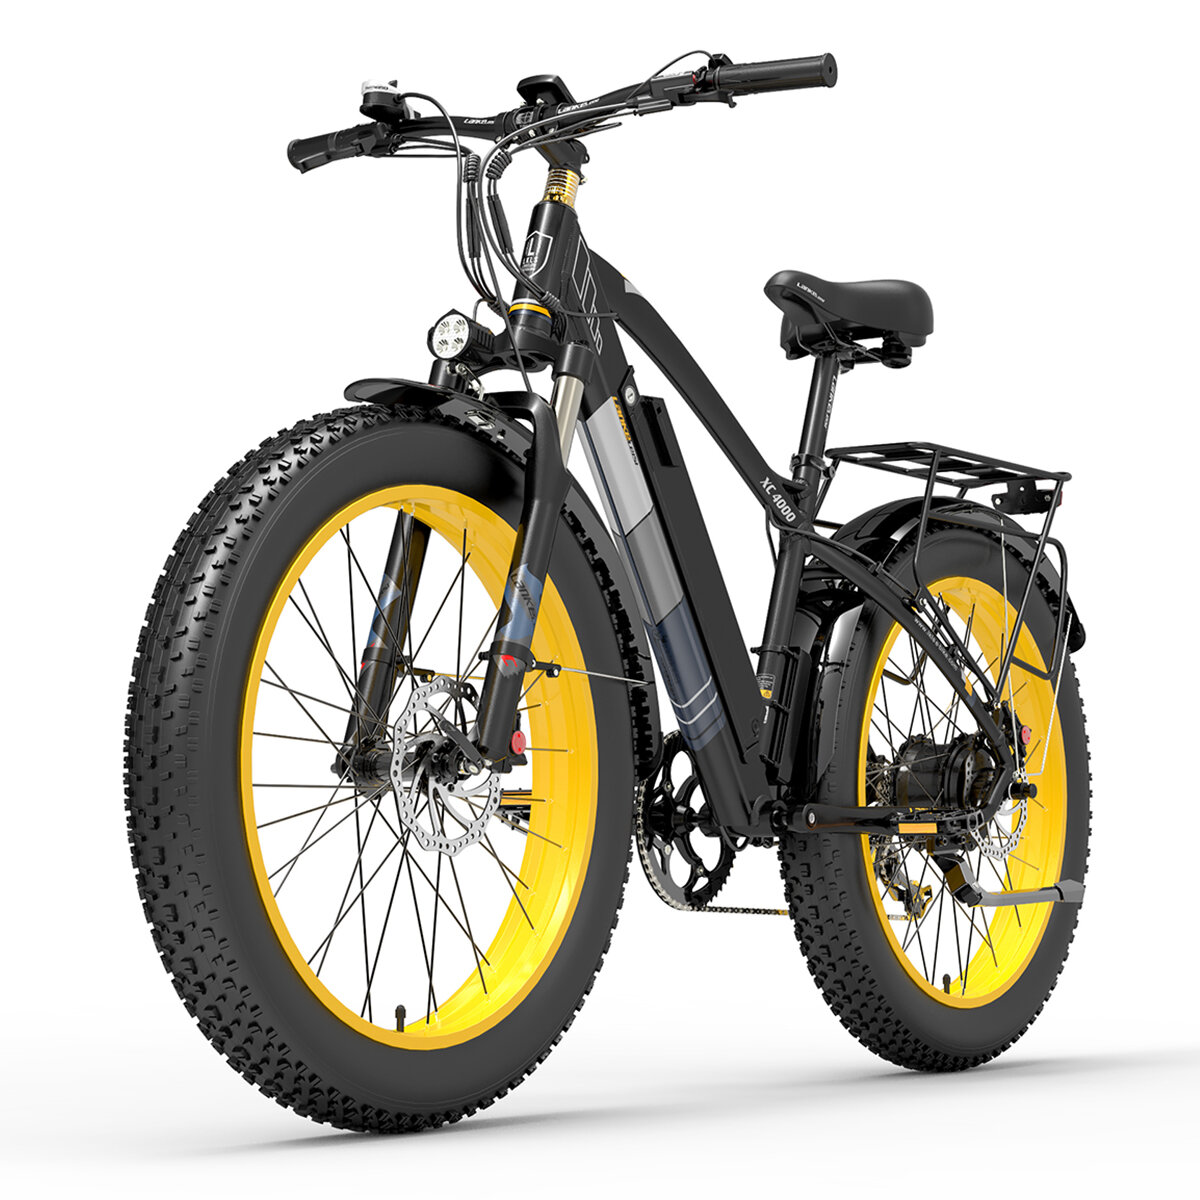 Image of [EU Direct] LANKELEISI XC4000 145Ah 48V 1000W Electric Bicycle 26 Inches 100-120km Mileage Range Max Load 200kg